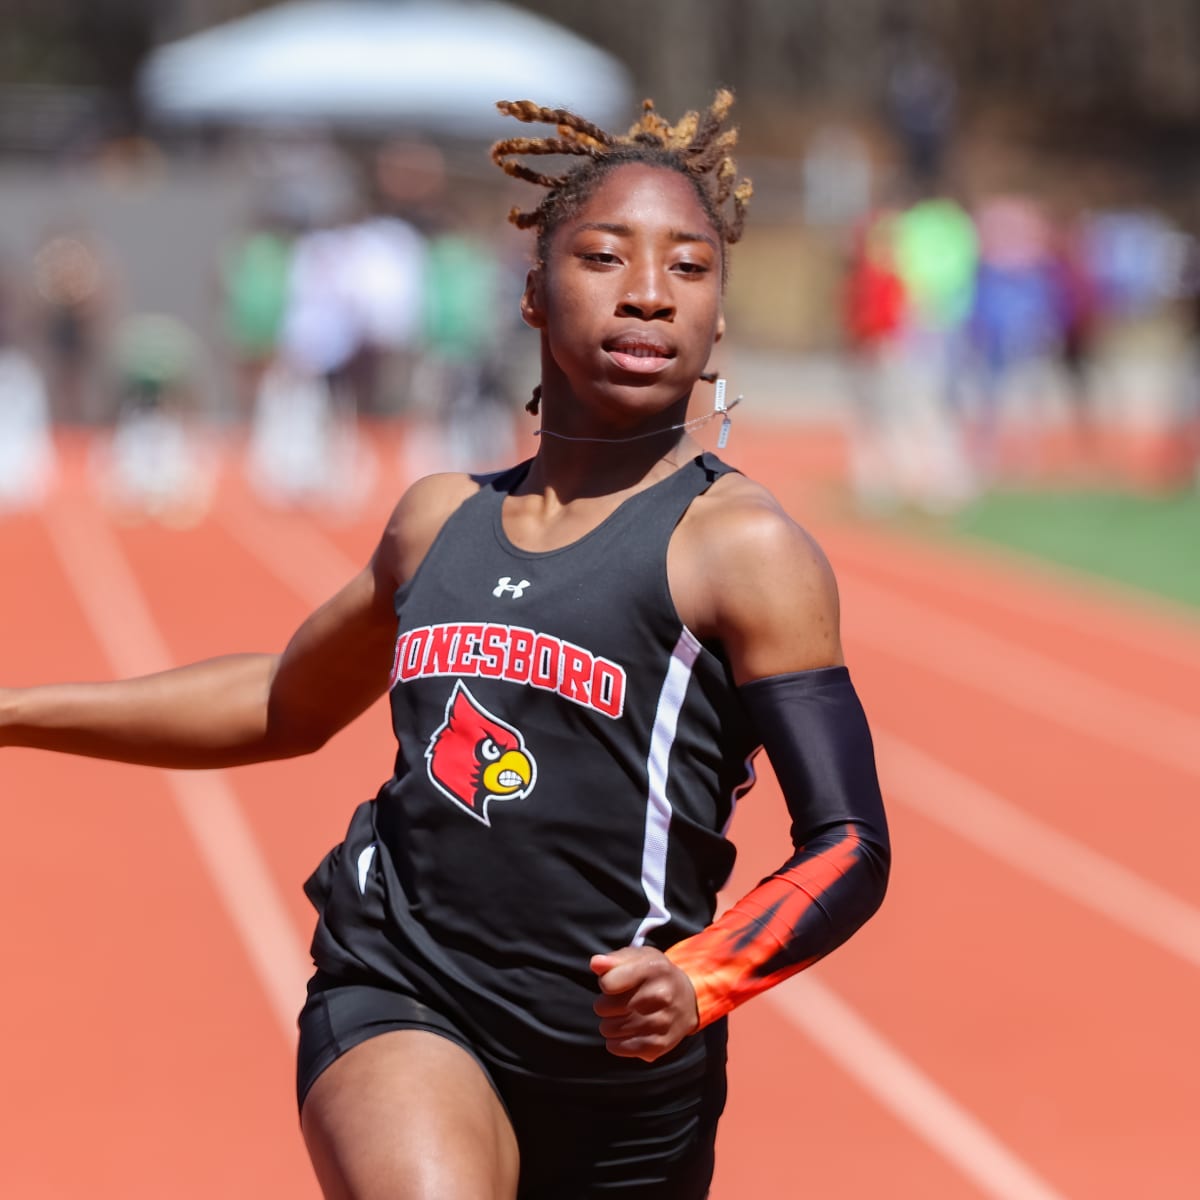 Best sprinters in high school girls track and field: Top 20